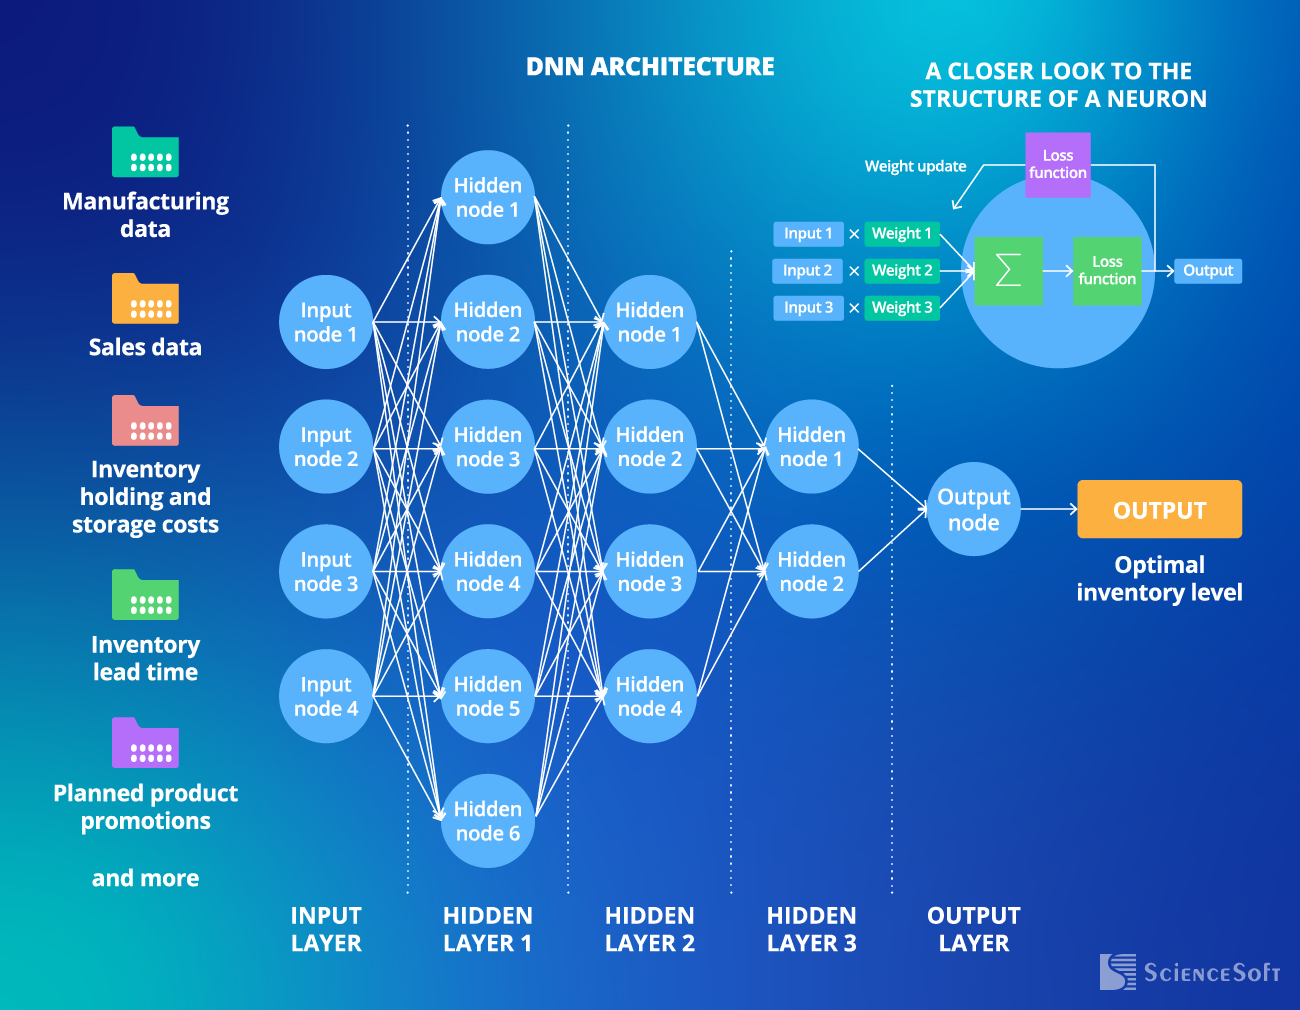 Sample Architecture of DNN for Inventory Optimization - ScienceSoft